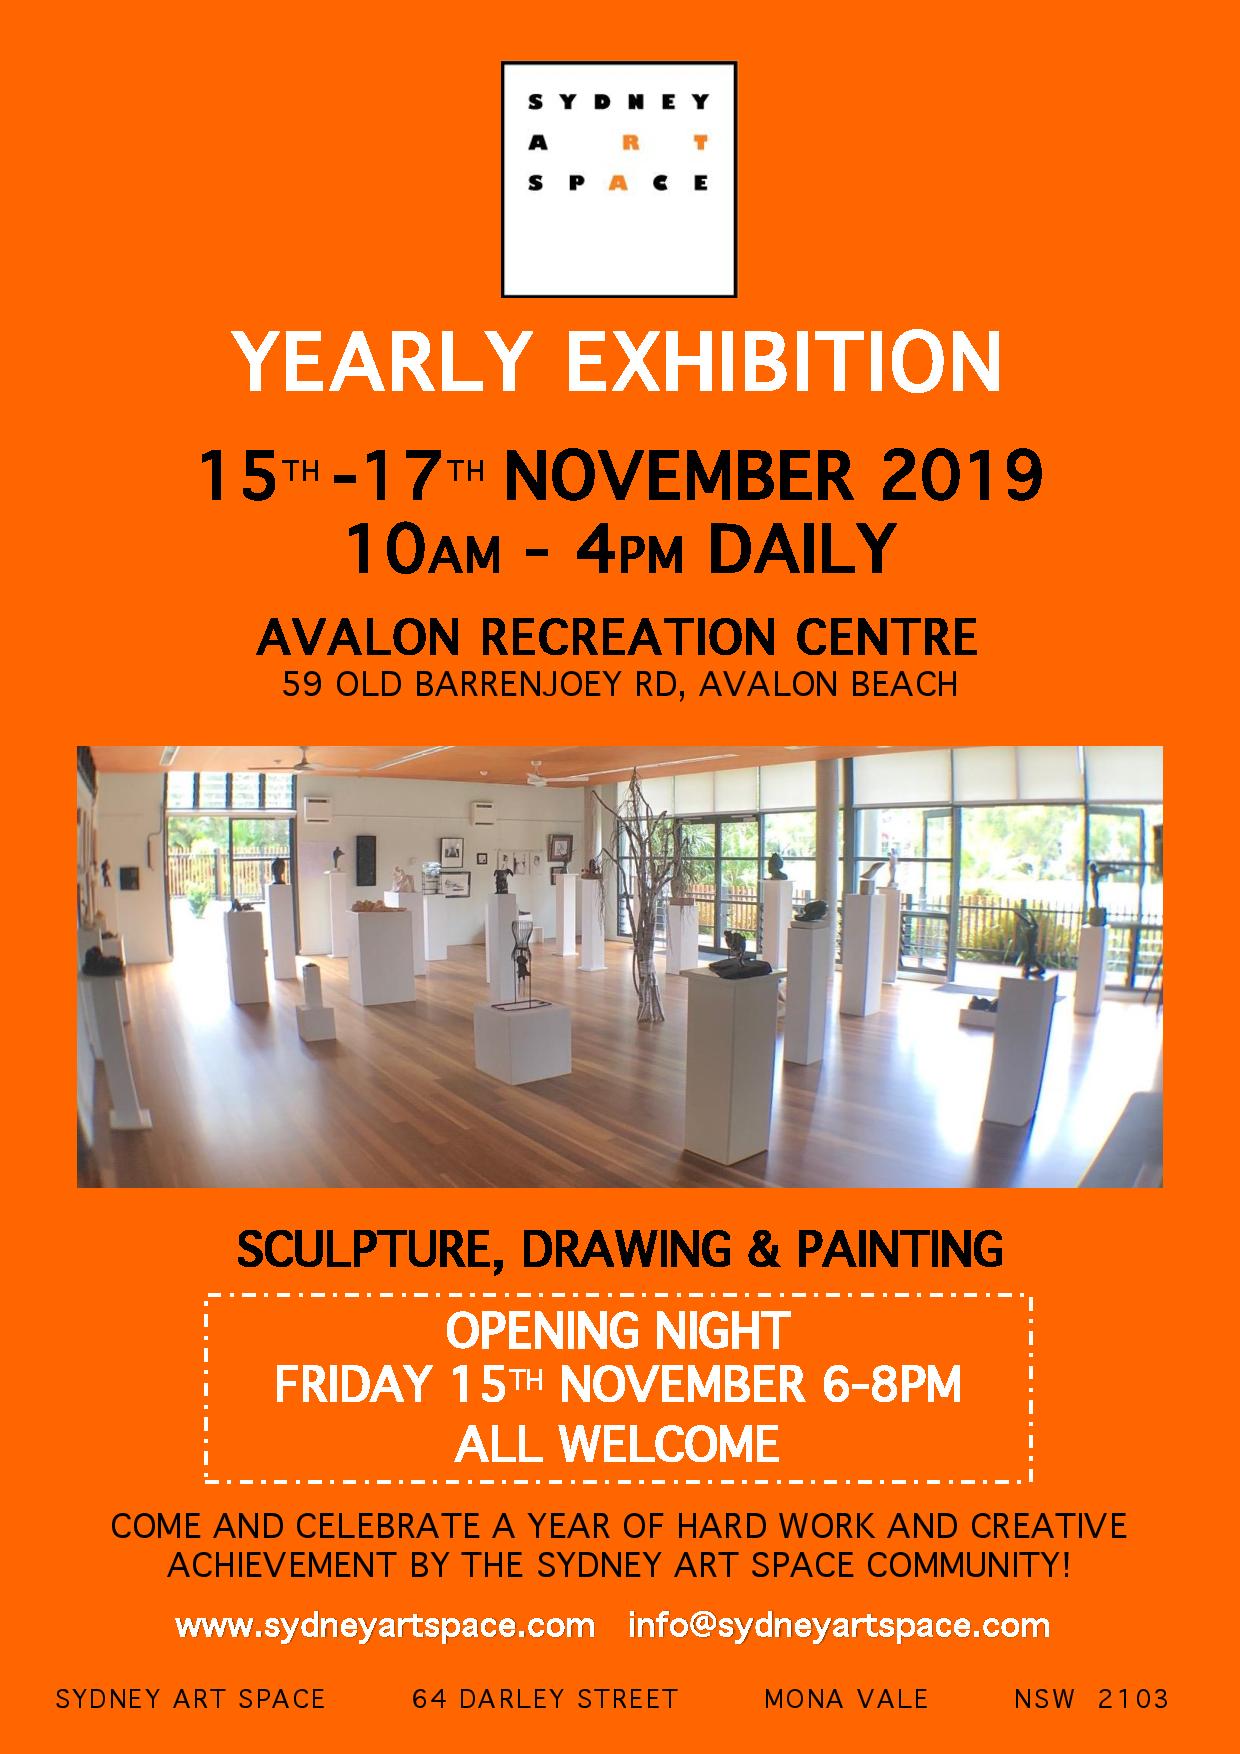 Sydney Art Space Yearly Exhibition 2019